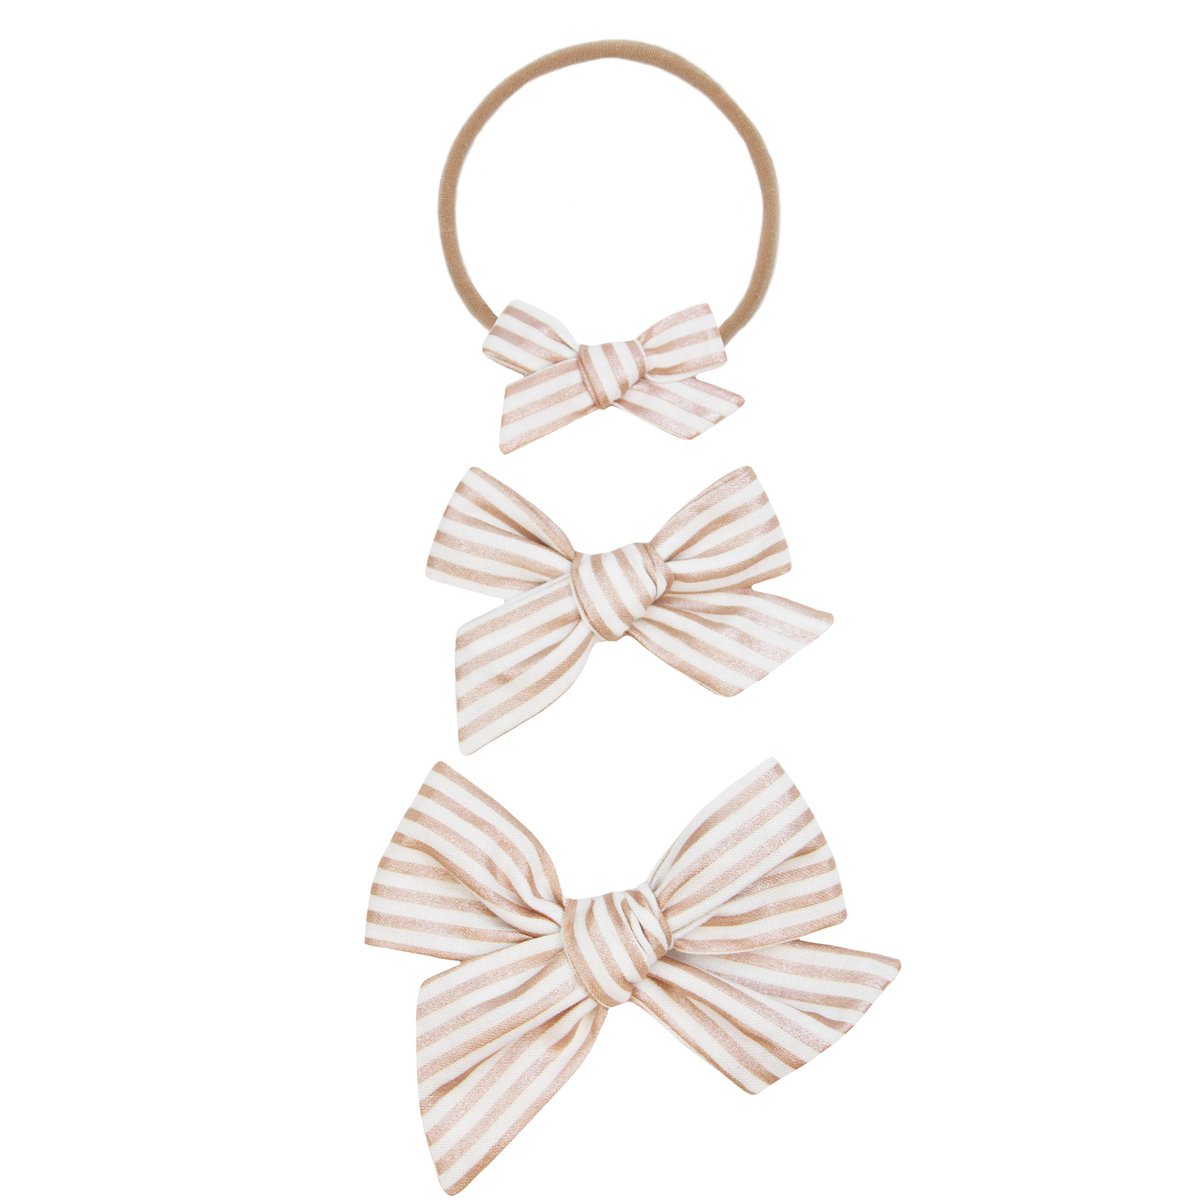 CLASSIC - ROSE GOLD STRIPE BOW